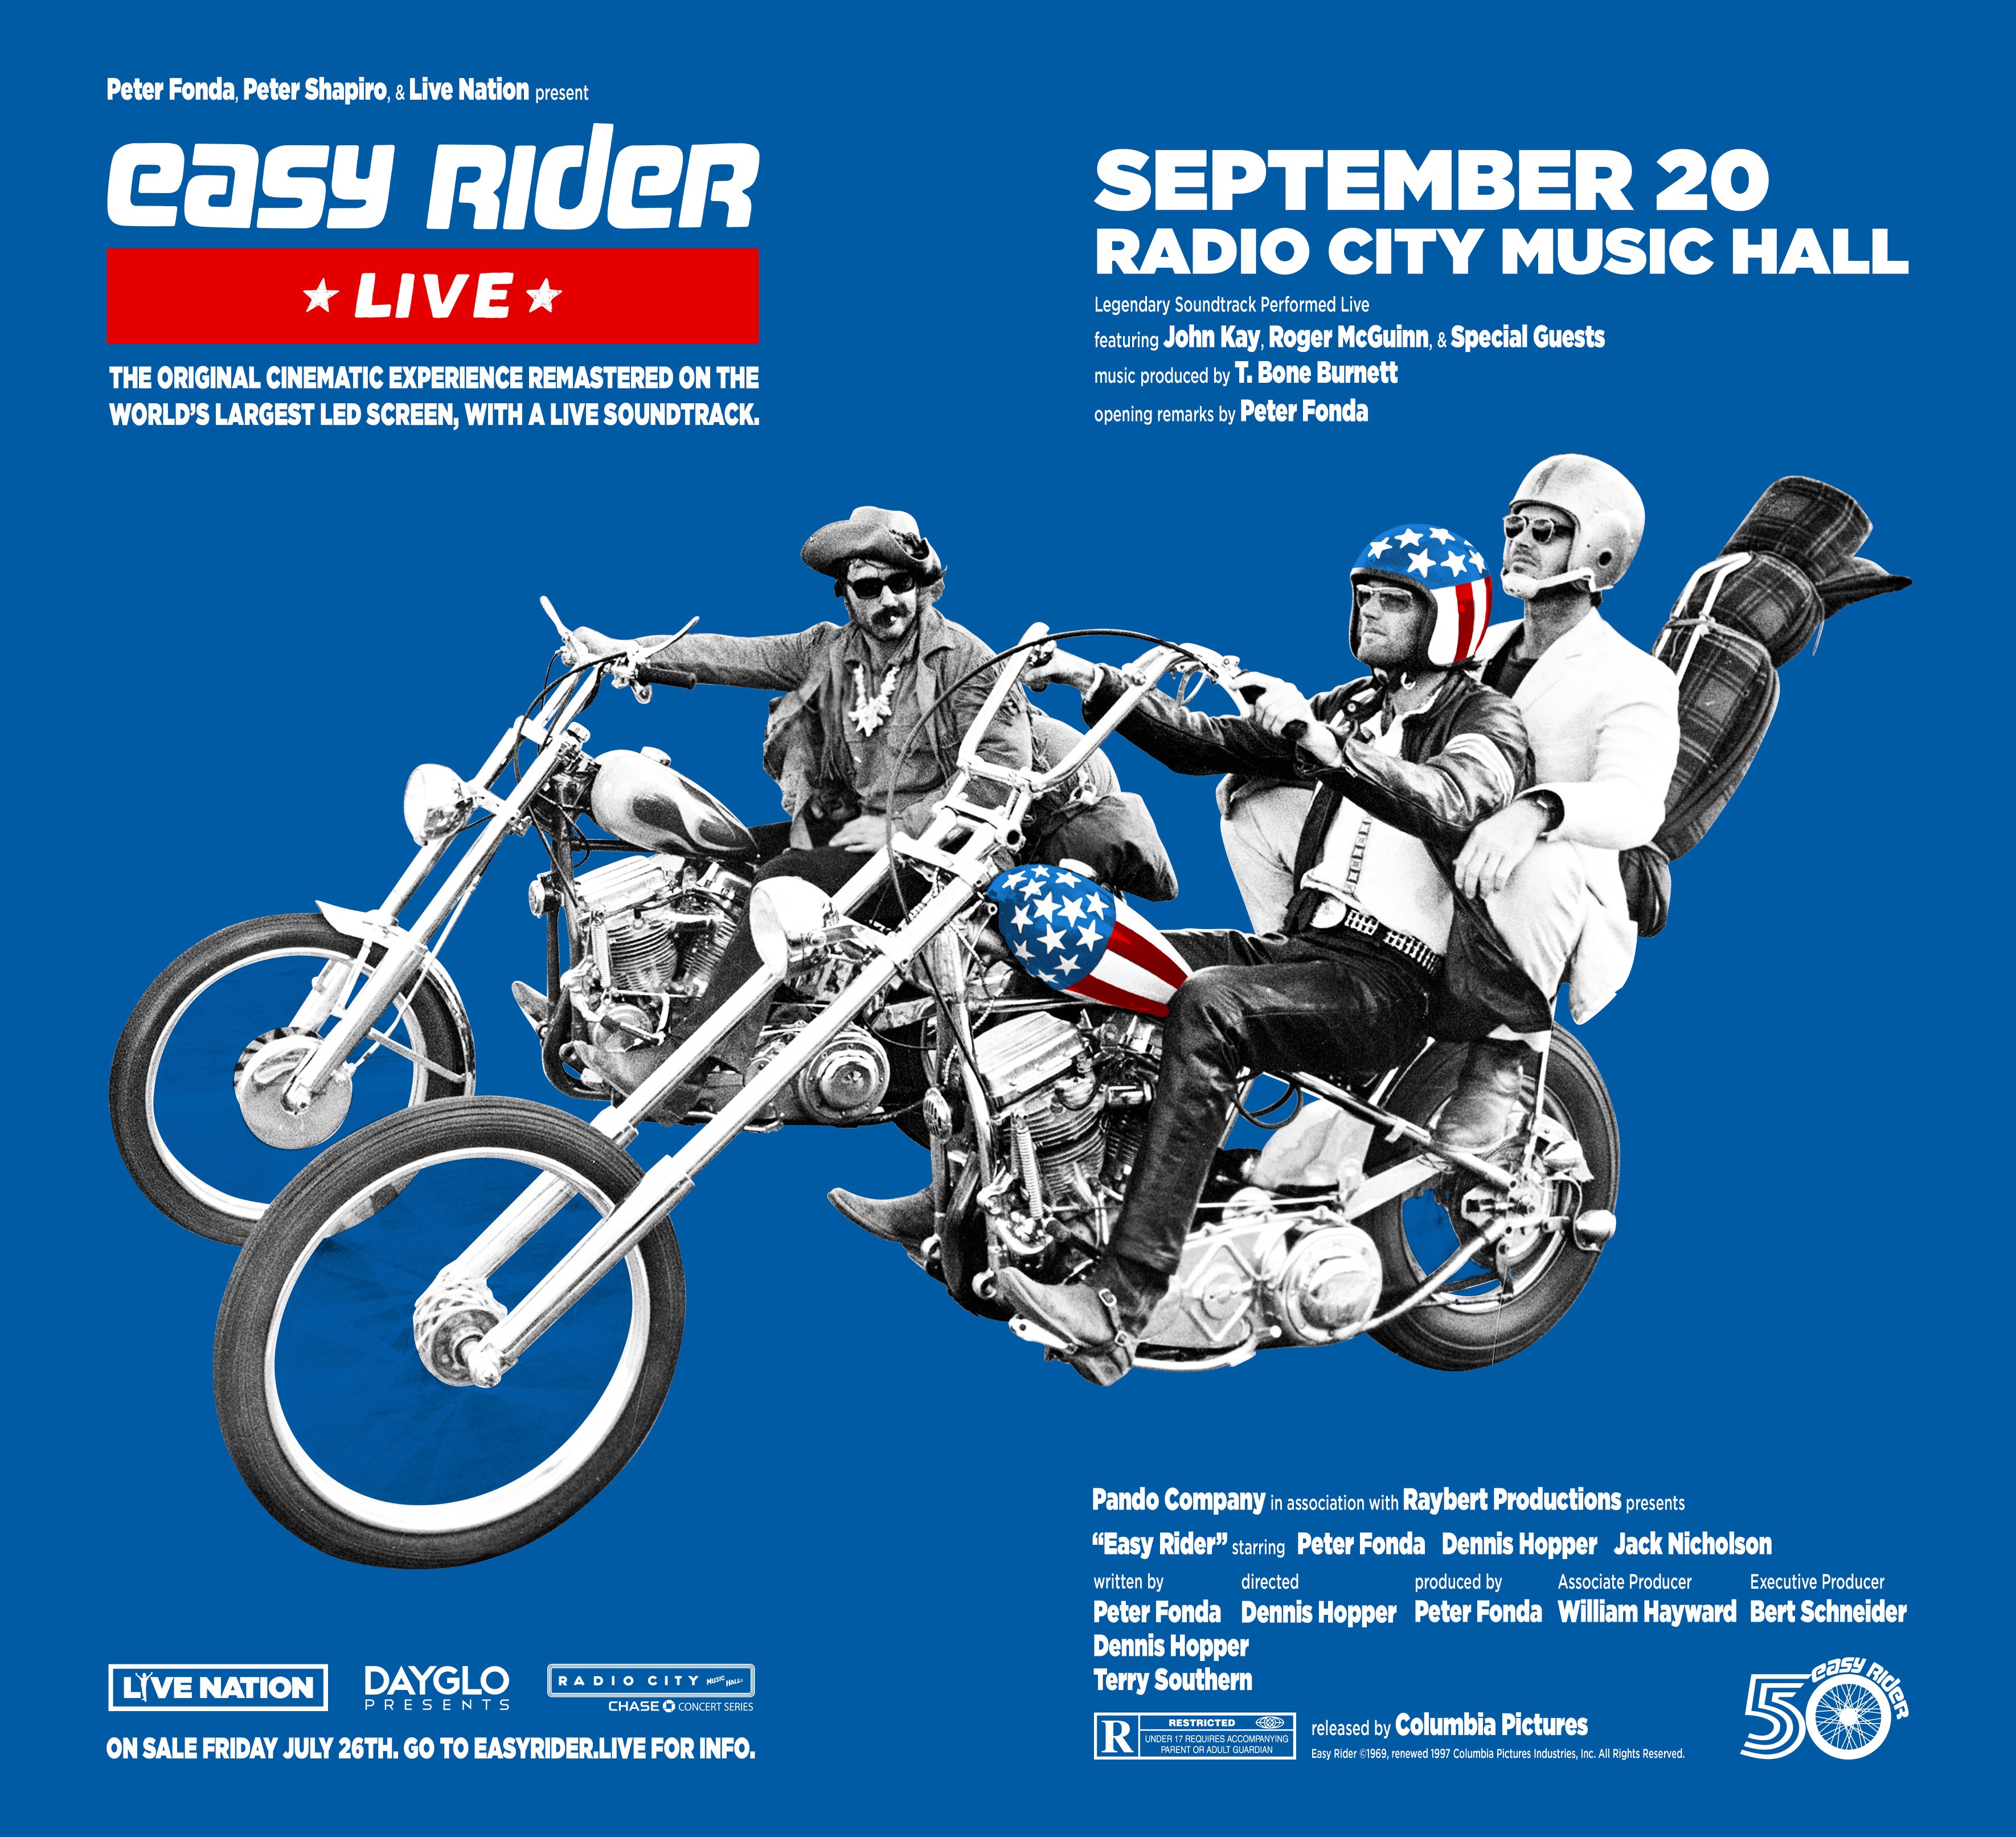 50th Anniversary ‘Easy Rider’ Screening Will Feature Live Soundtrack by Members of Steppenwolf and The Byrds